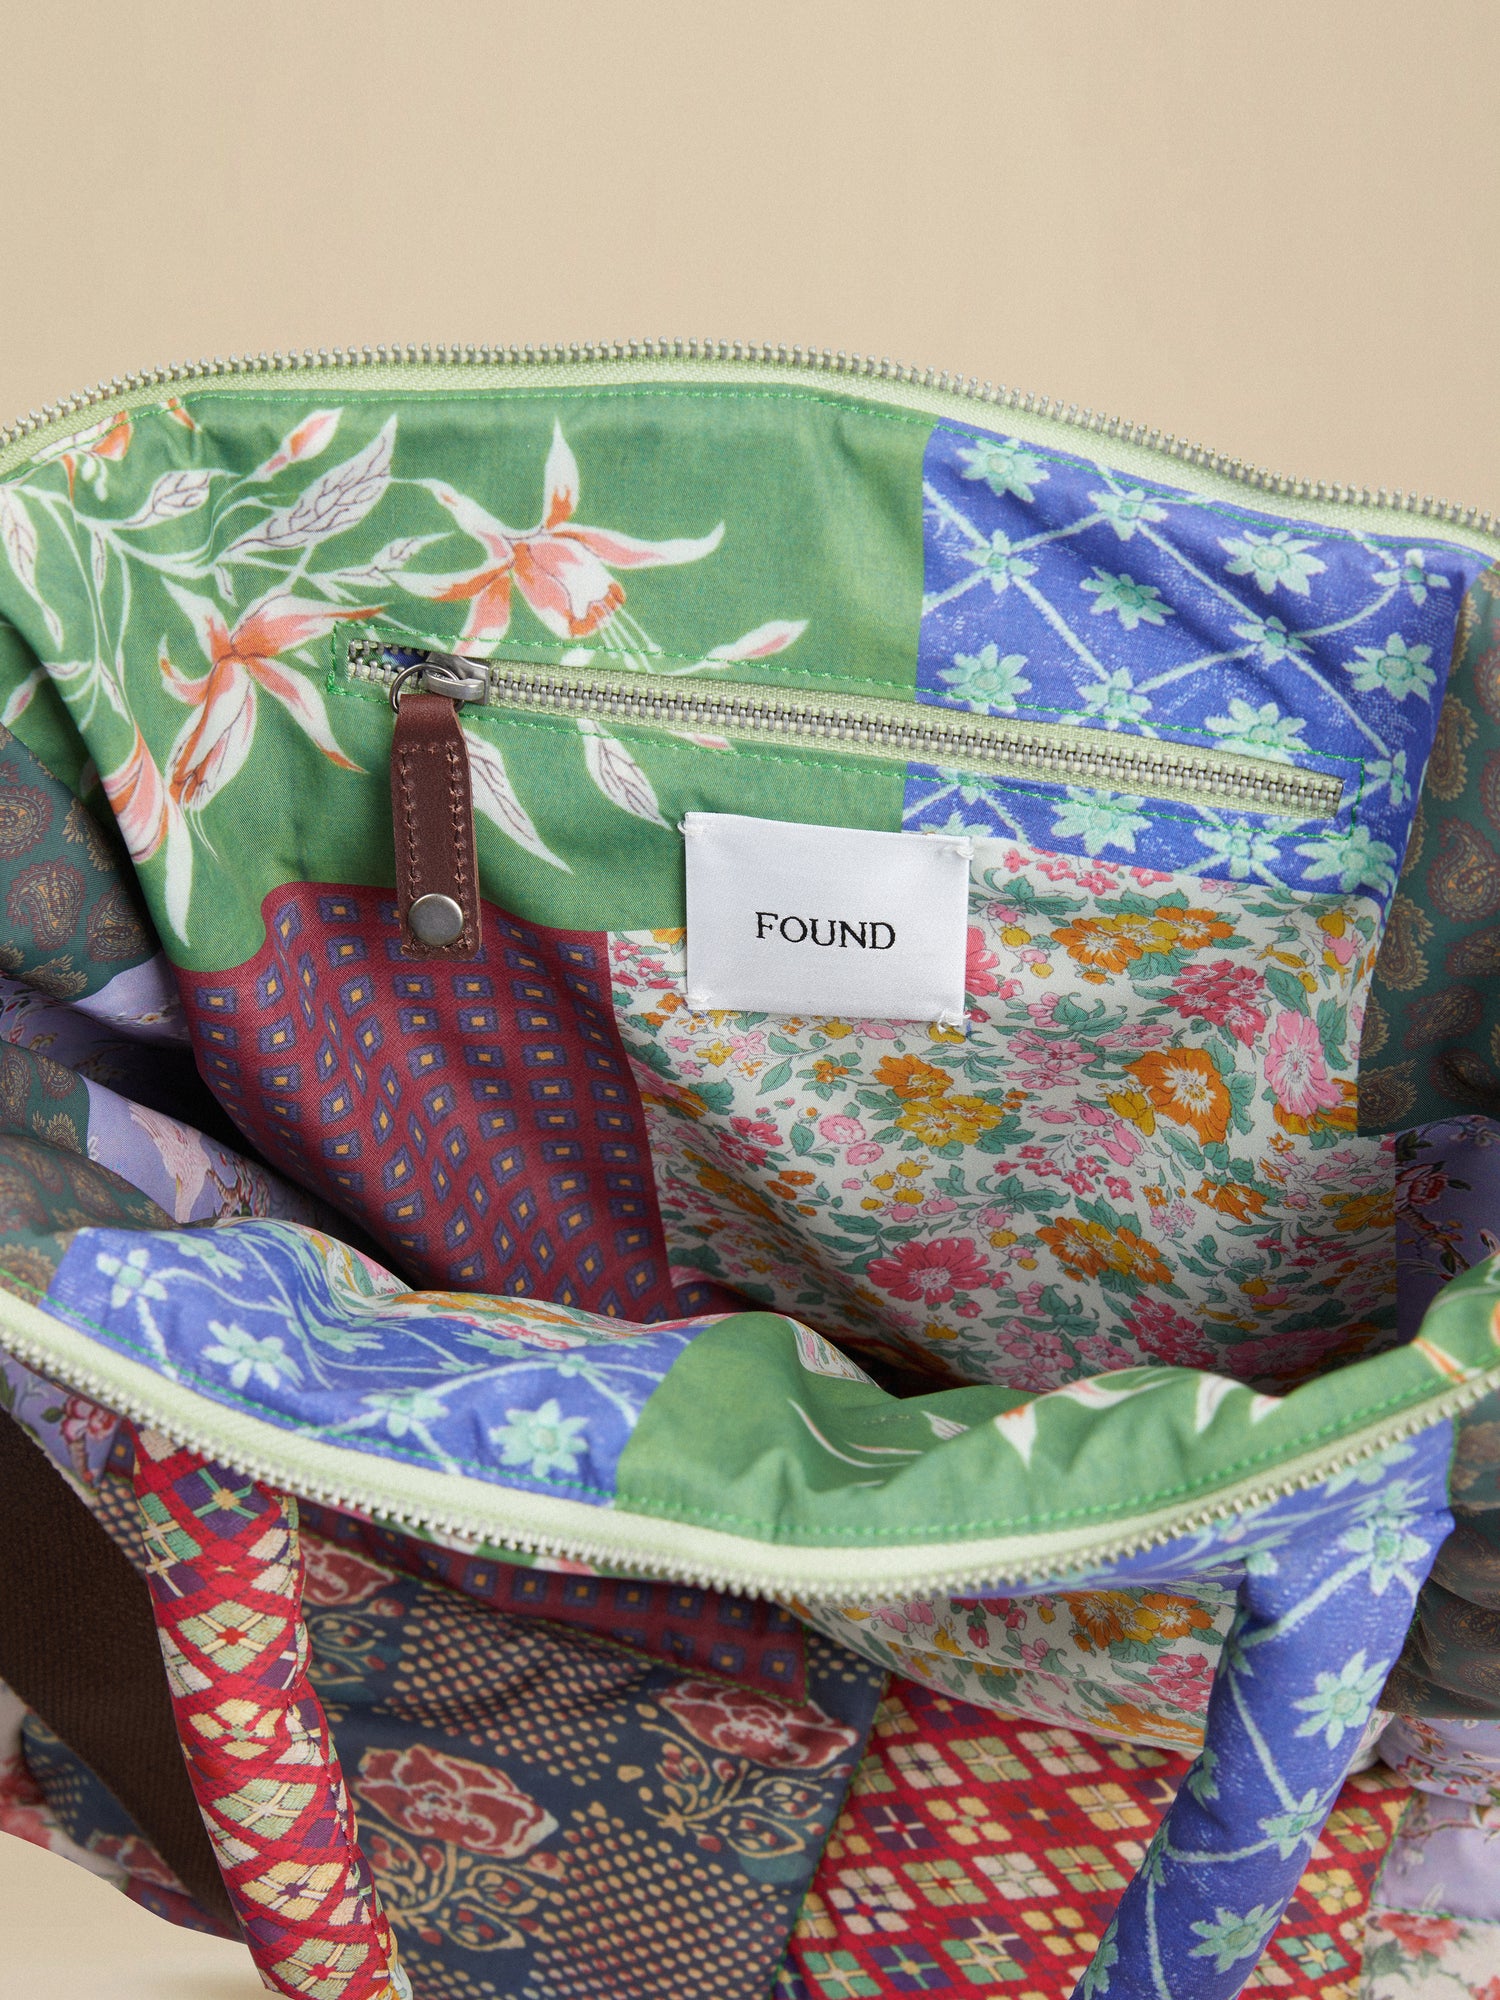 A colorful Gardenia Tapestry Bag with a South Asian prints patchwork pattern by Profound.